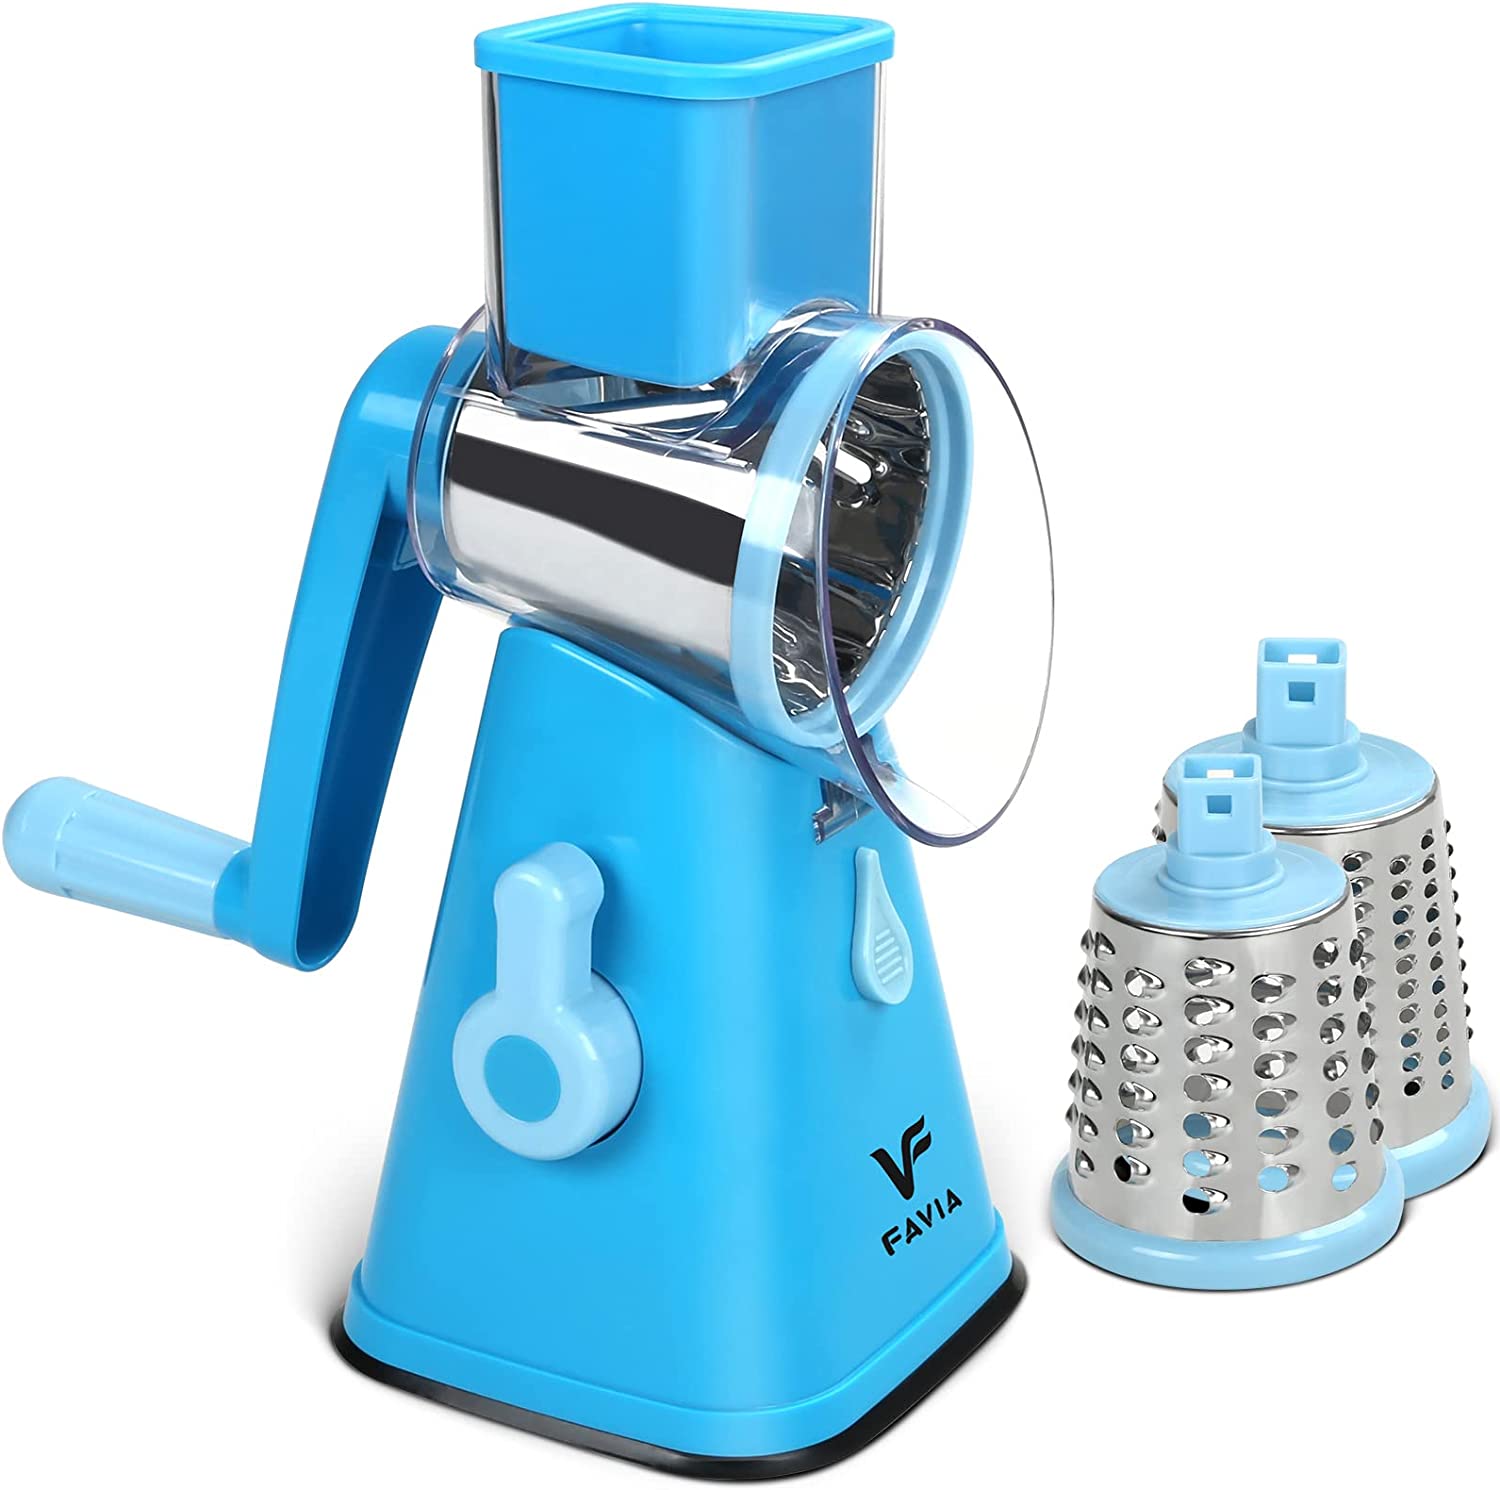 https://www.dontwasteyourmoney.com/wp-content/uploads/2023/05/favia-dishwasher-safe-rotary-cheese-grater-cheese-grater.jpg